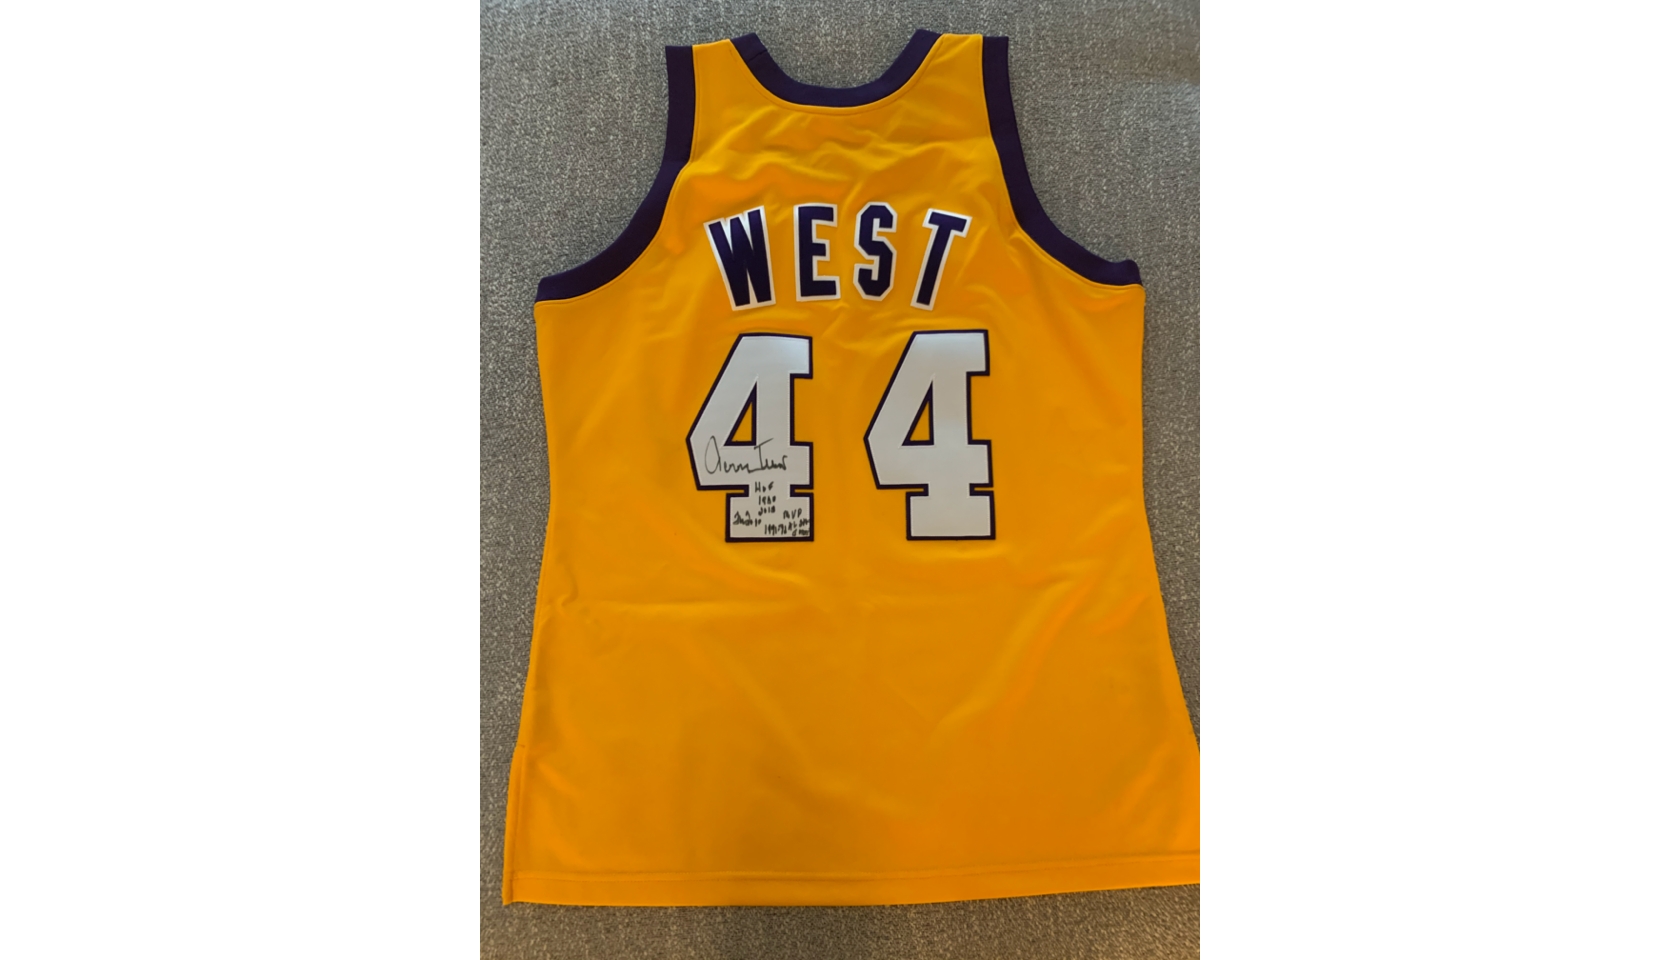 Jerry West Hand Print Signed Autographed Yellow Jersey JSA BB00704